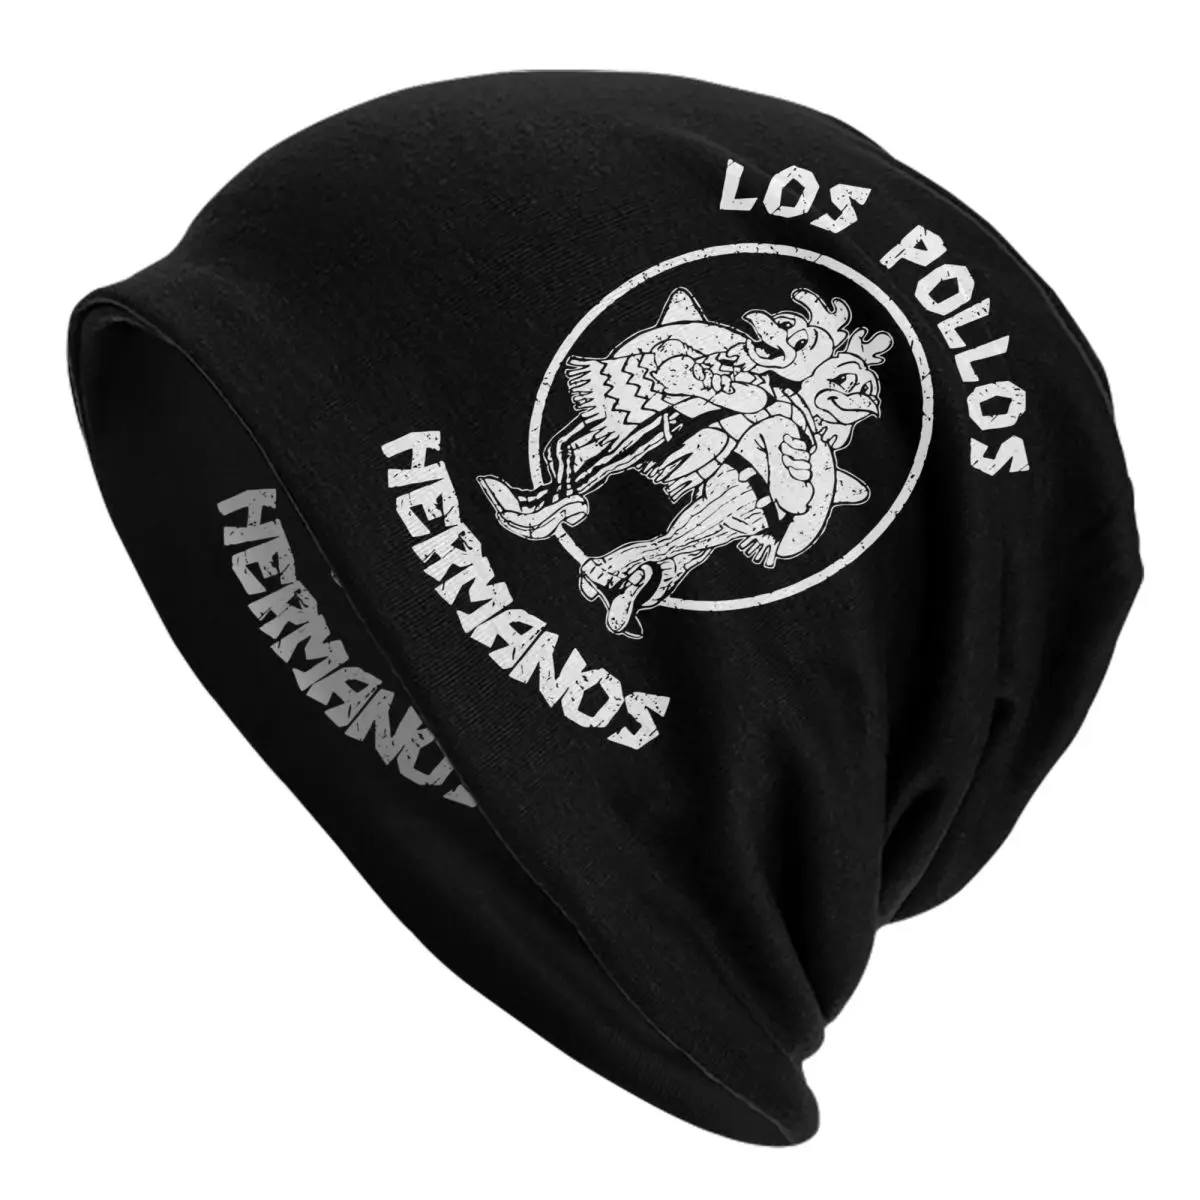 

Los Pollos Hermanos Black And White Bonnet Hats Knitting Hats Casual Outdoor Breaking Bad Skullies Beanies Hat Unisex Warm Caps